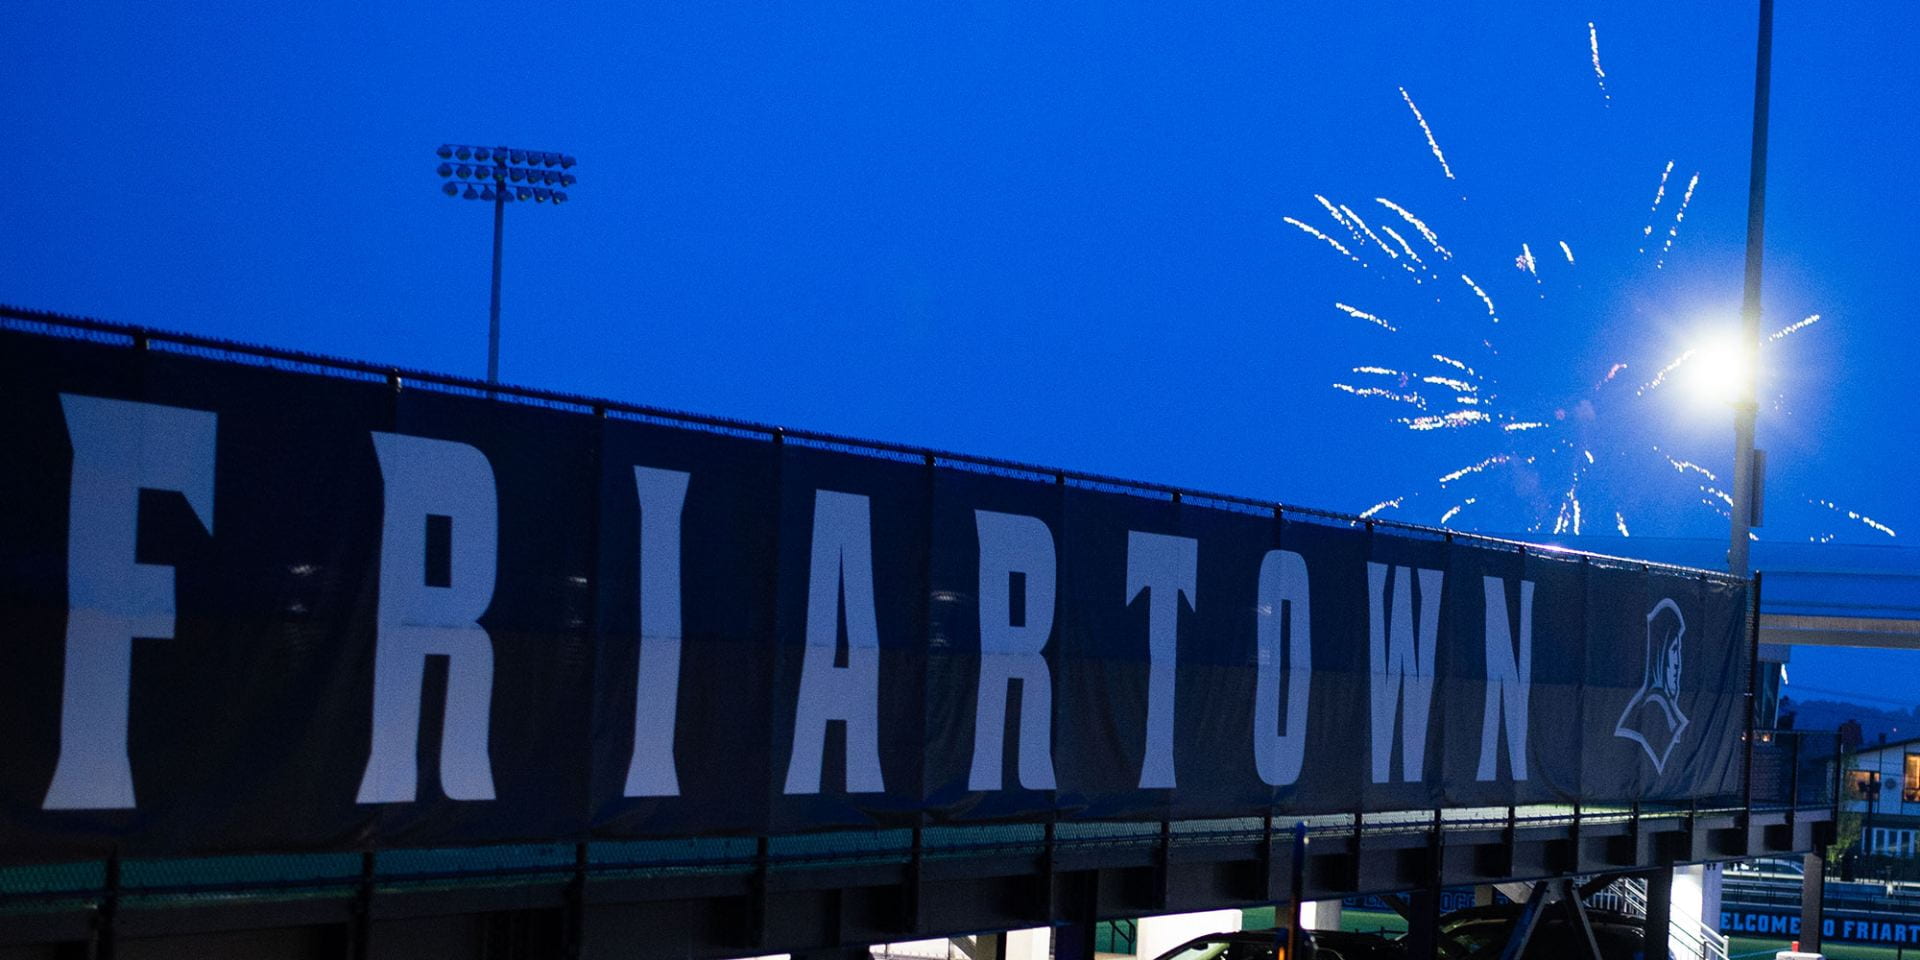 friartown sign with firework